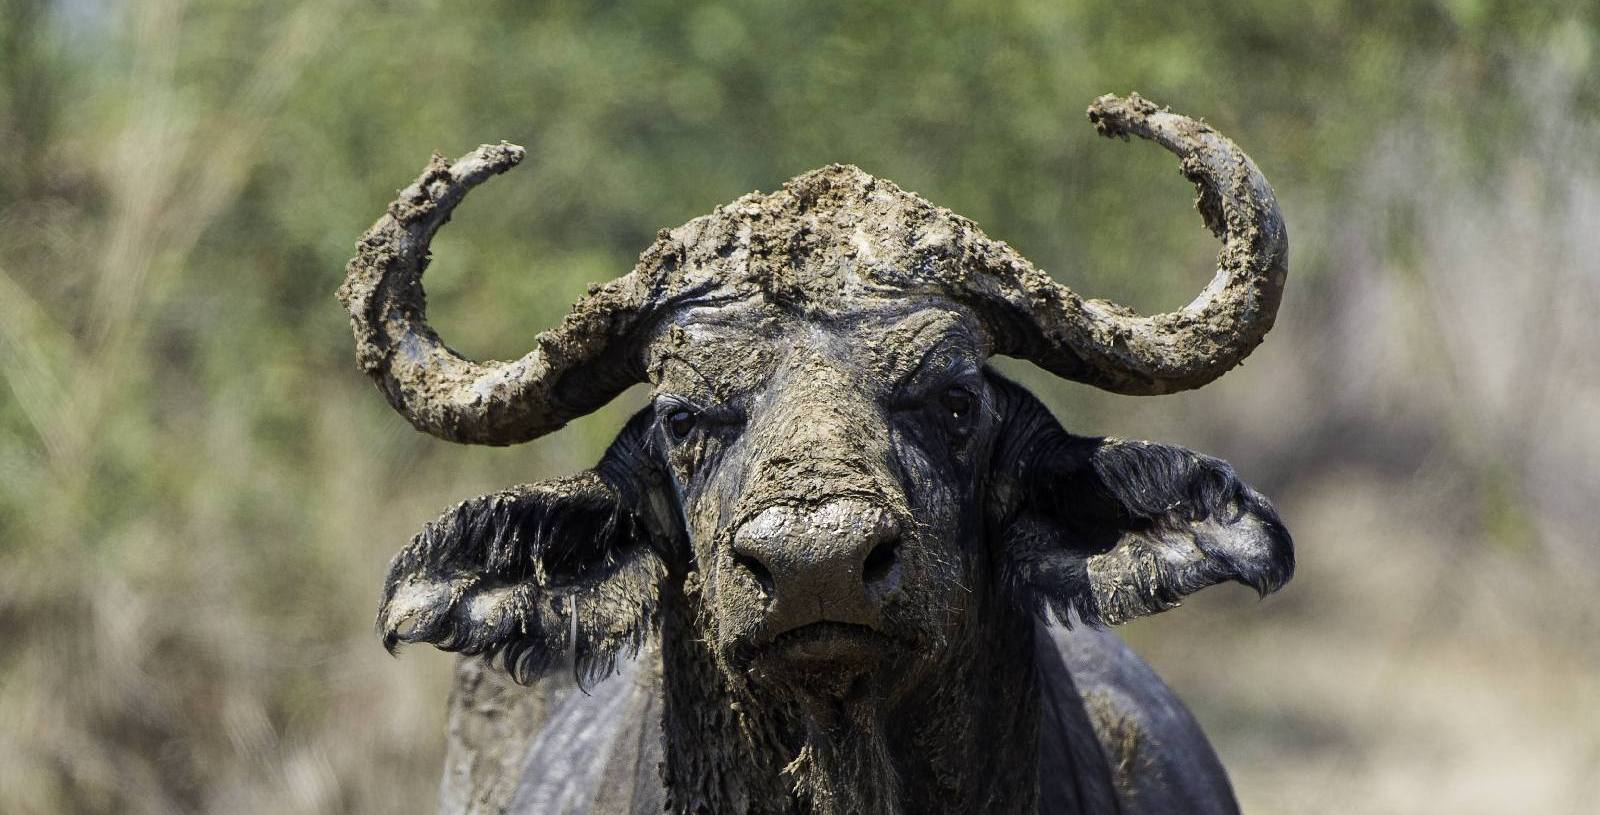 Buffalo looking straight ahead with a muddy face in South Luangwa